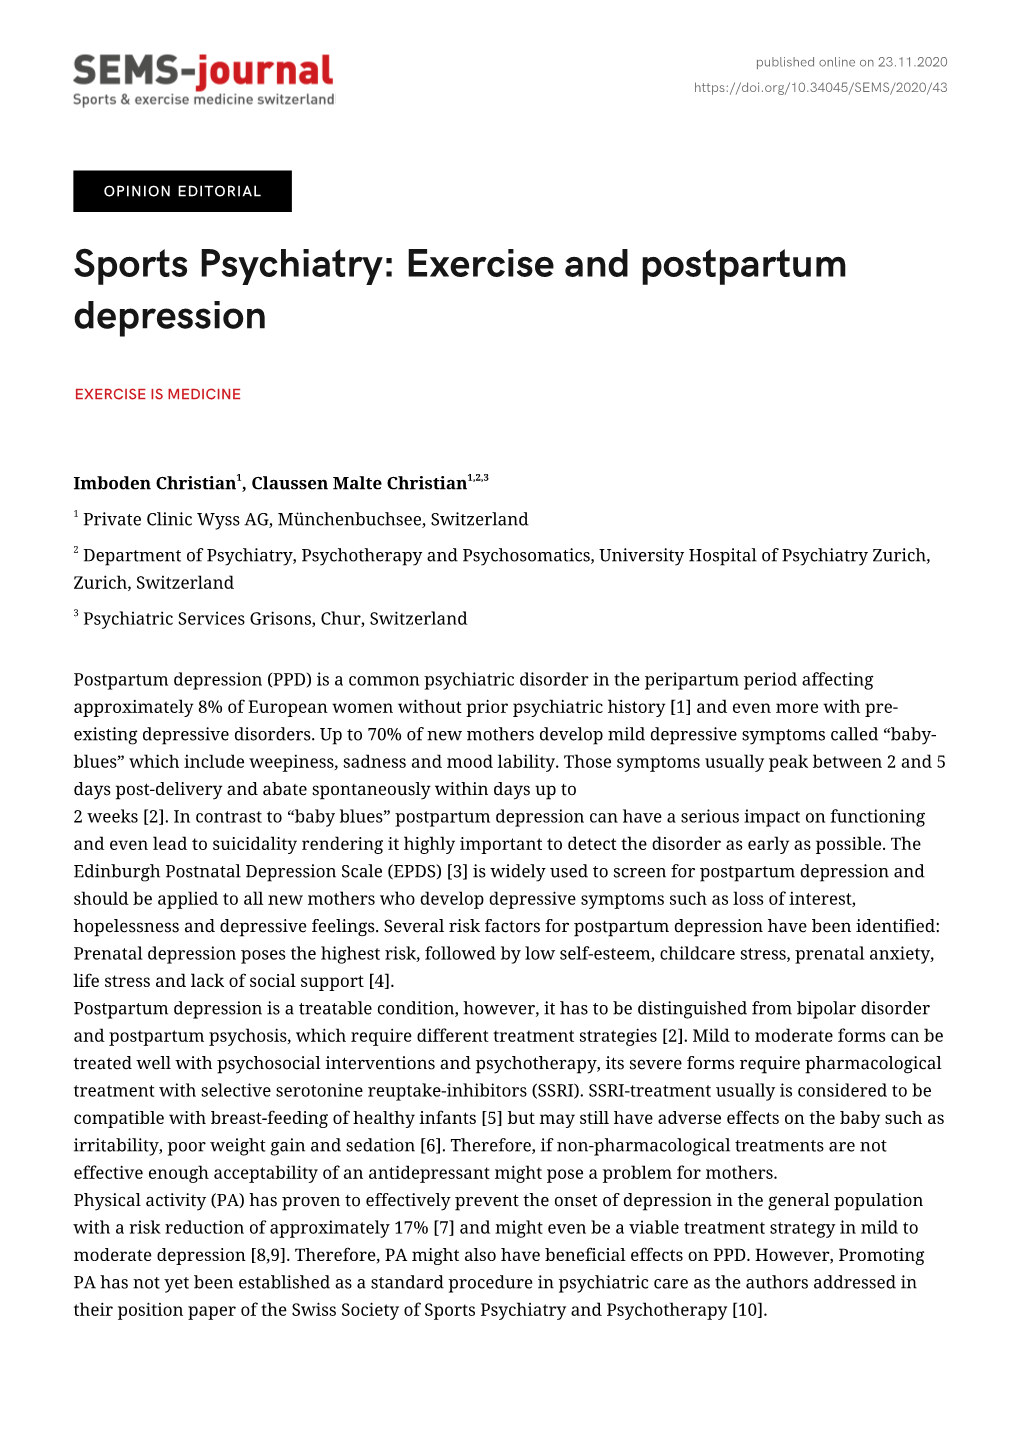 Sports Psychiatry: Exercise and Postpartum Depression